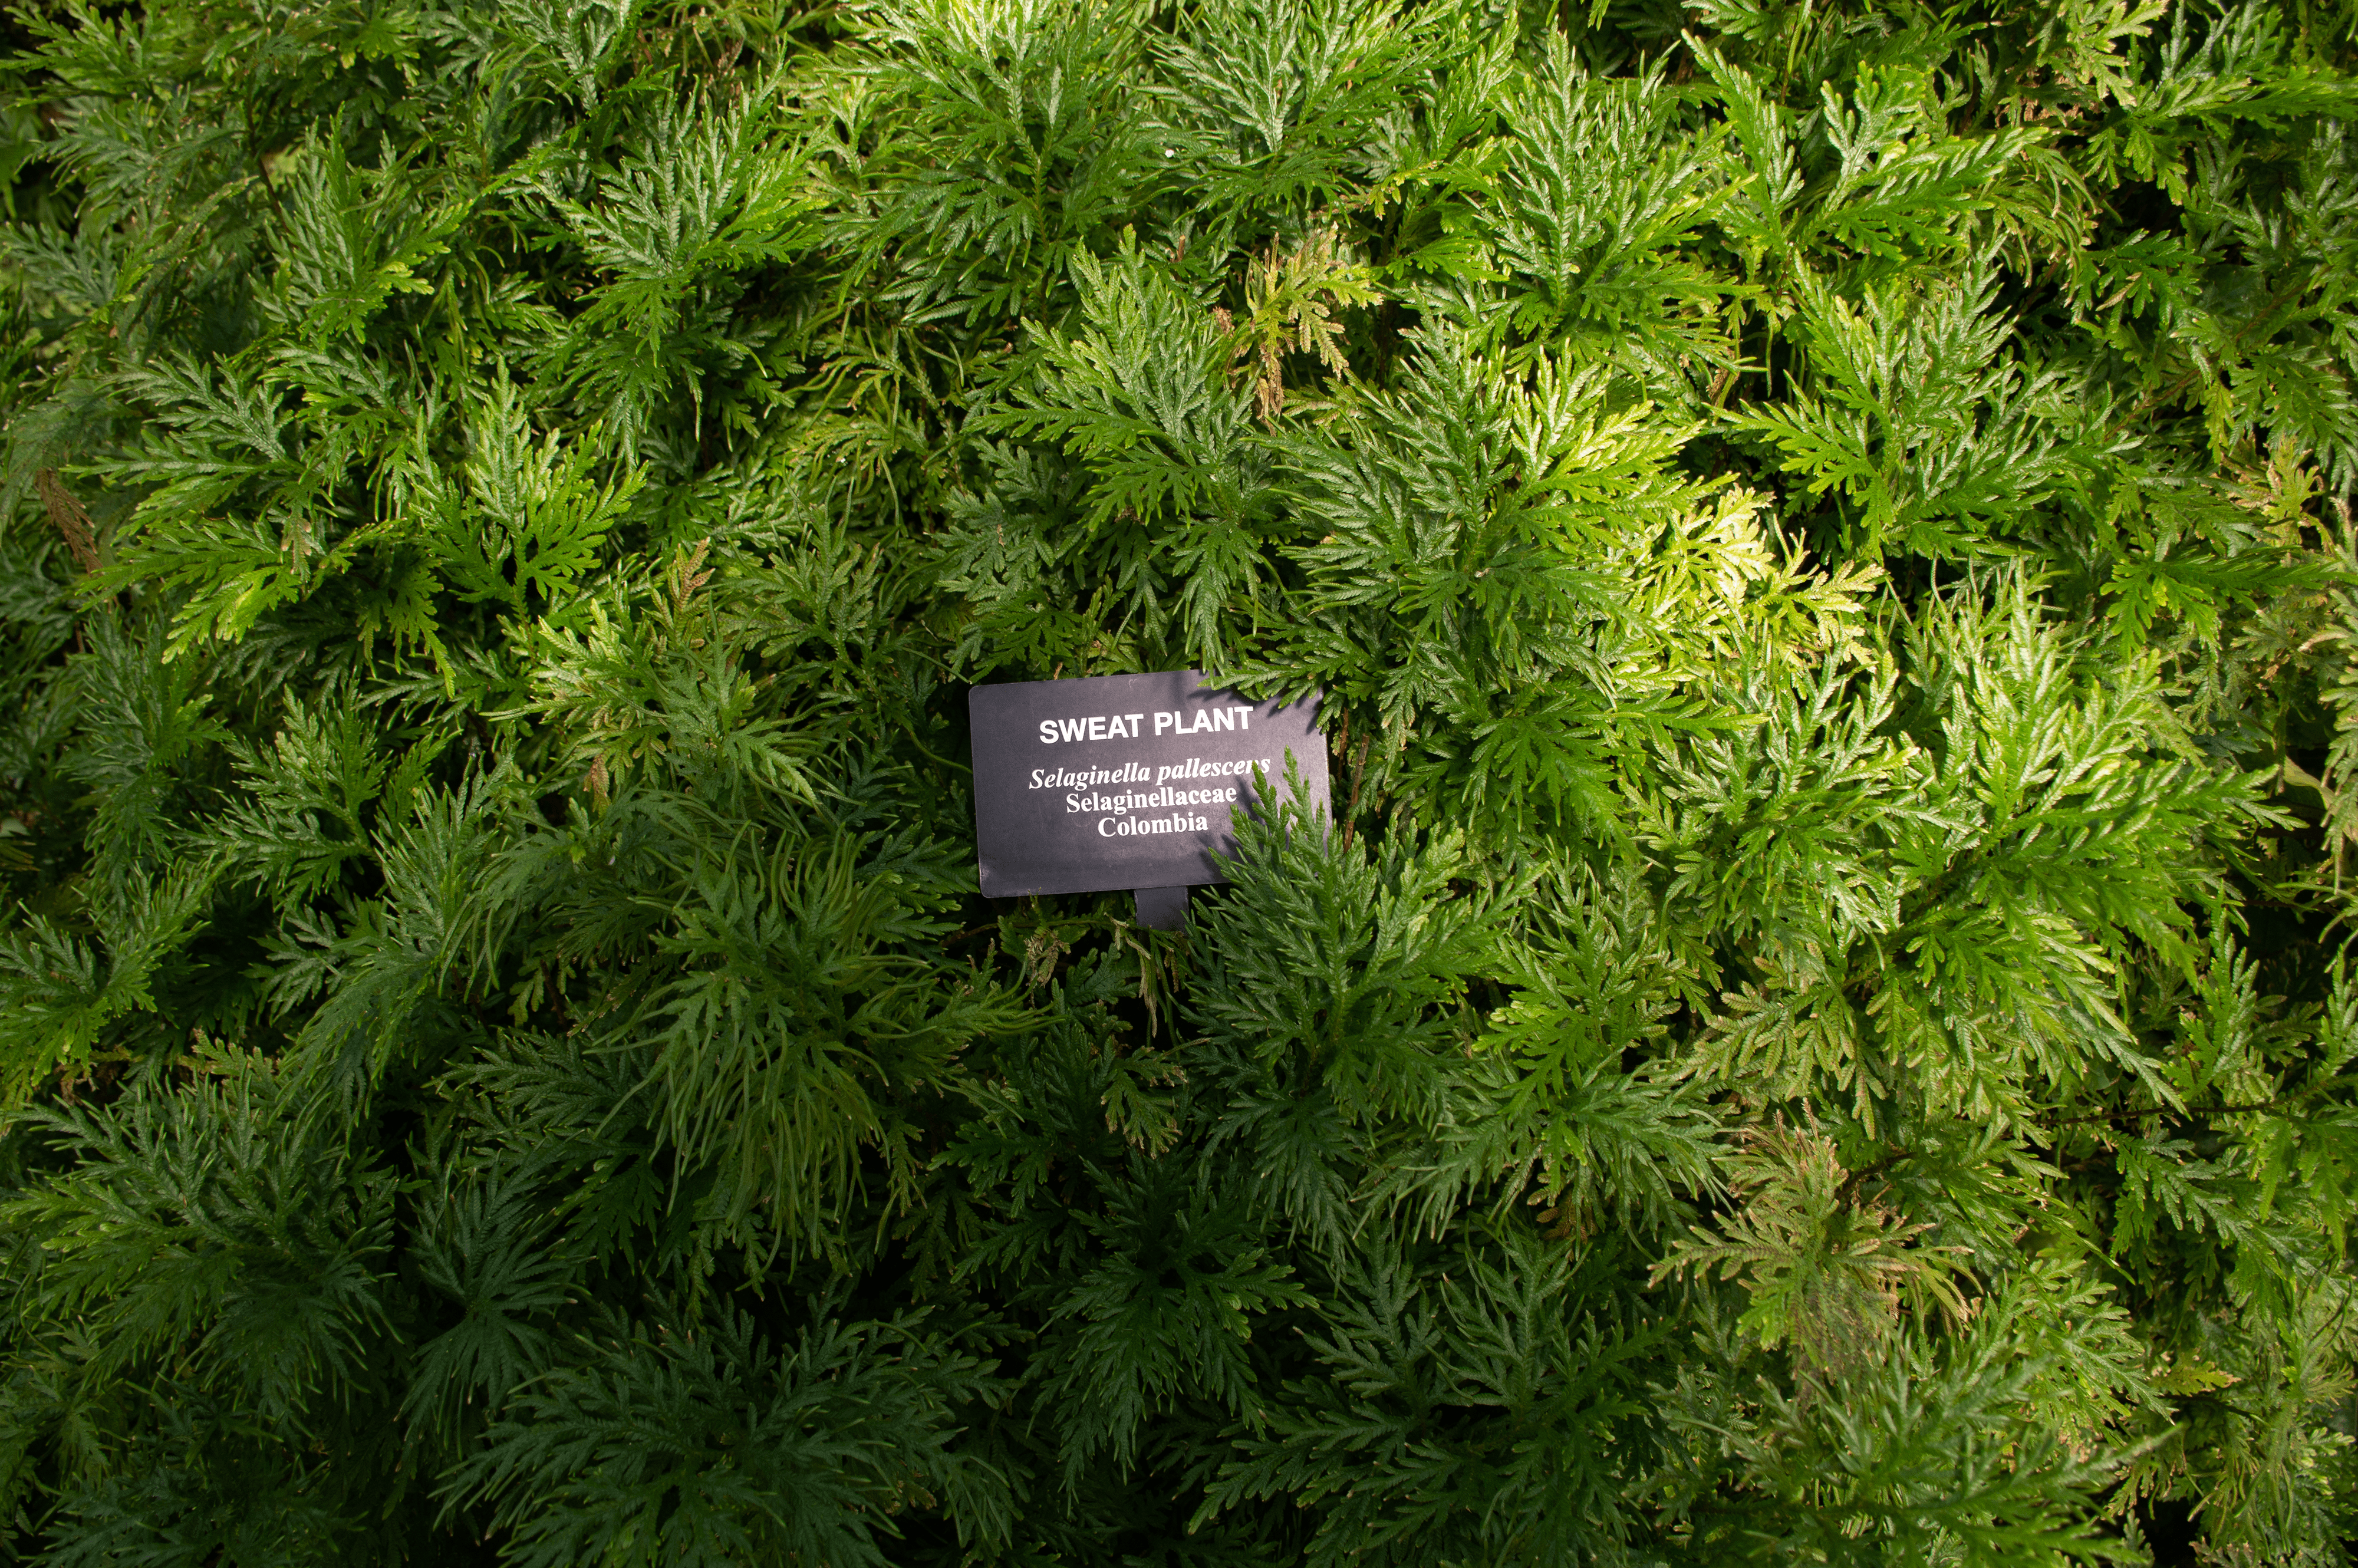 A close up of a bush with a sign in the middle reading “Sweat Plant”.